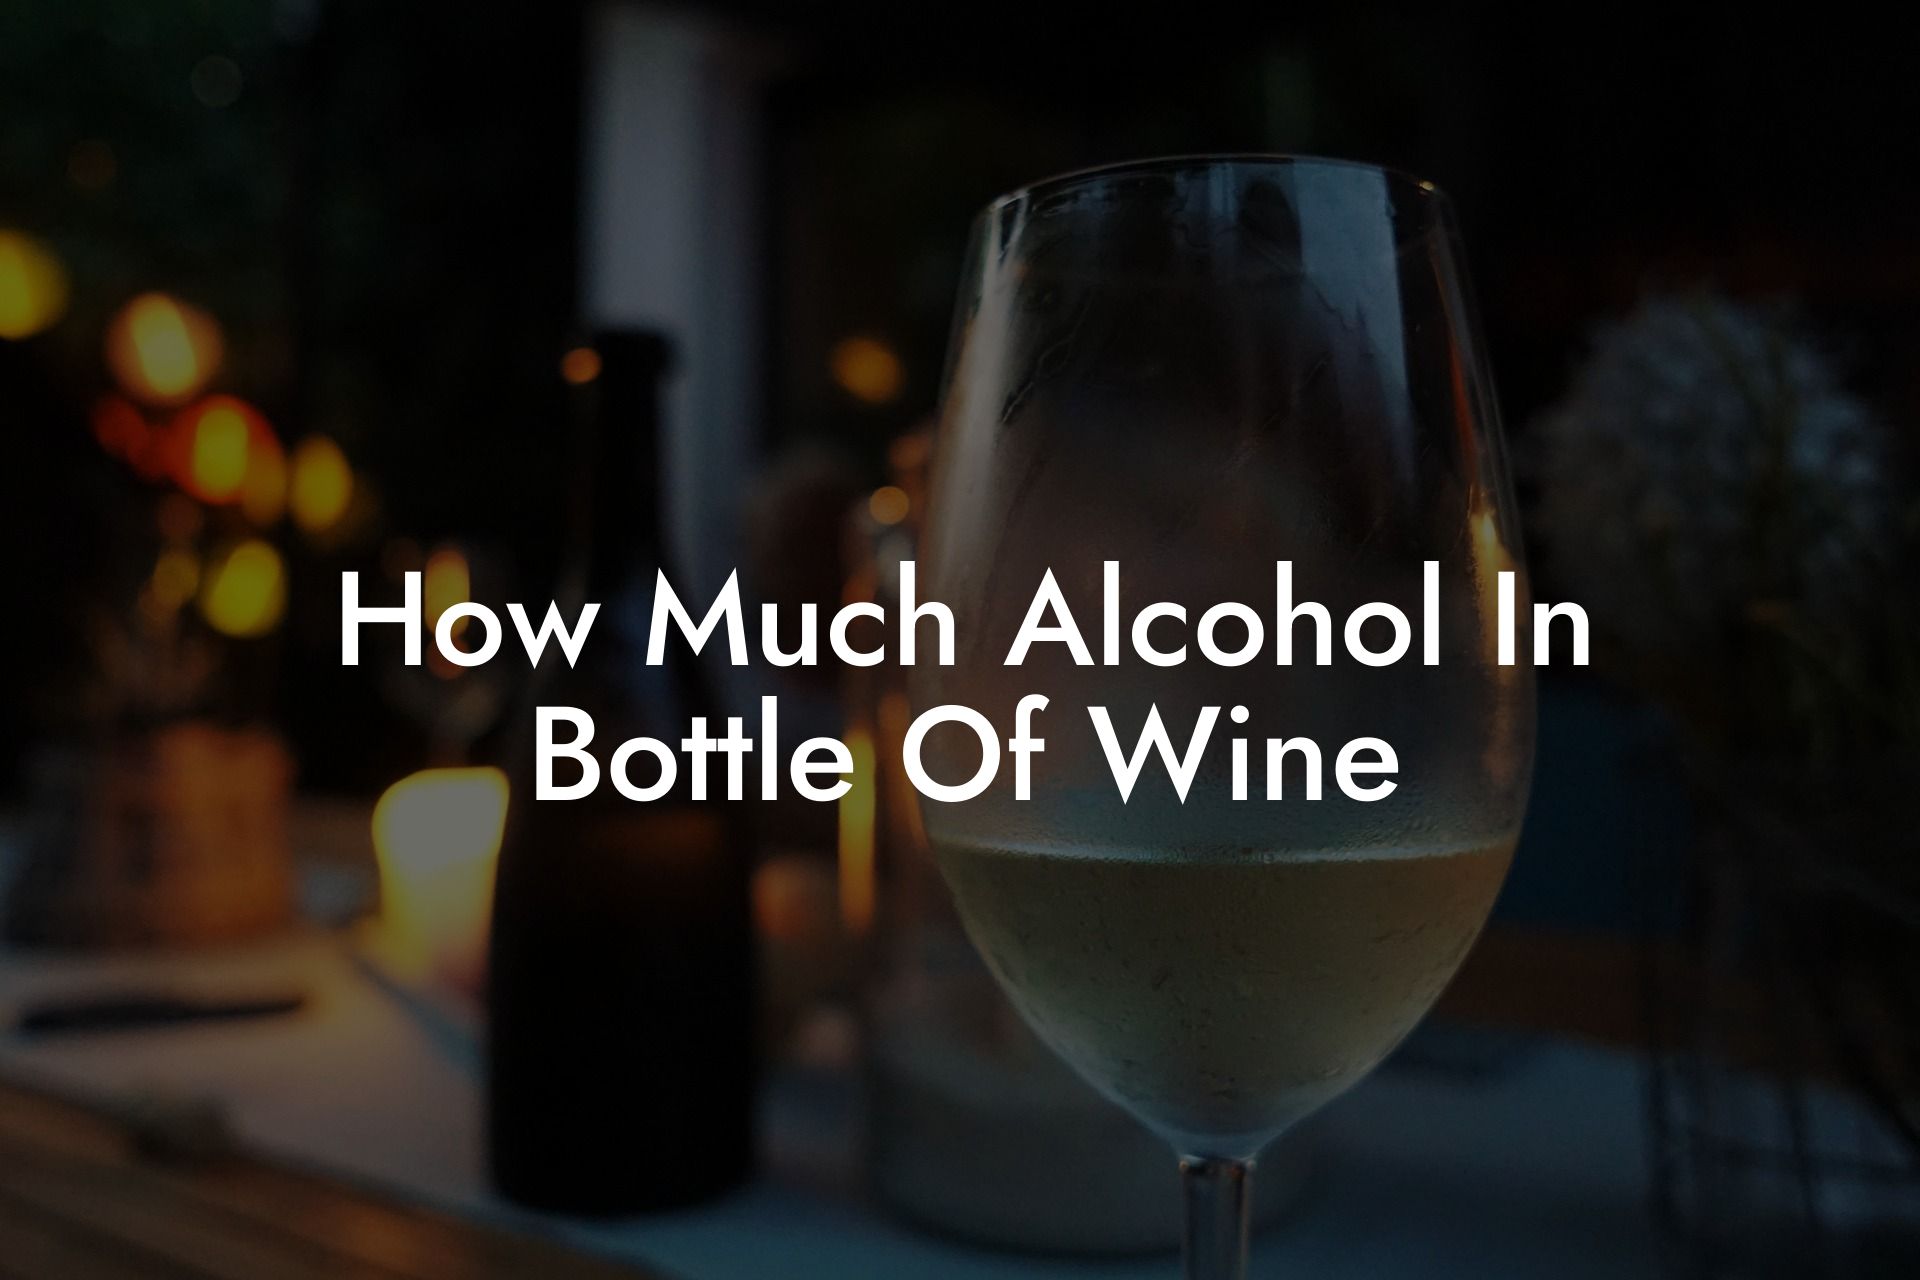 How Much Alcohol In Bottle Of Wine